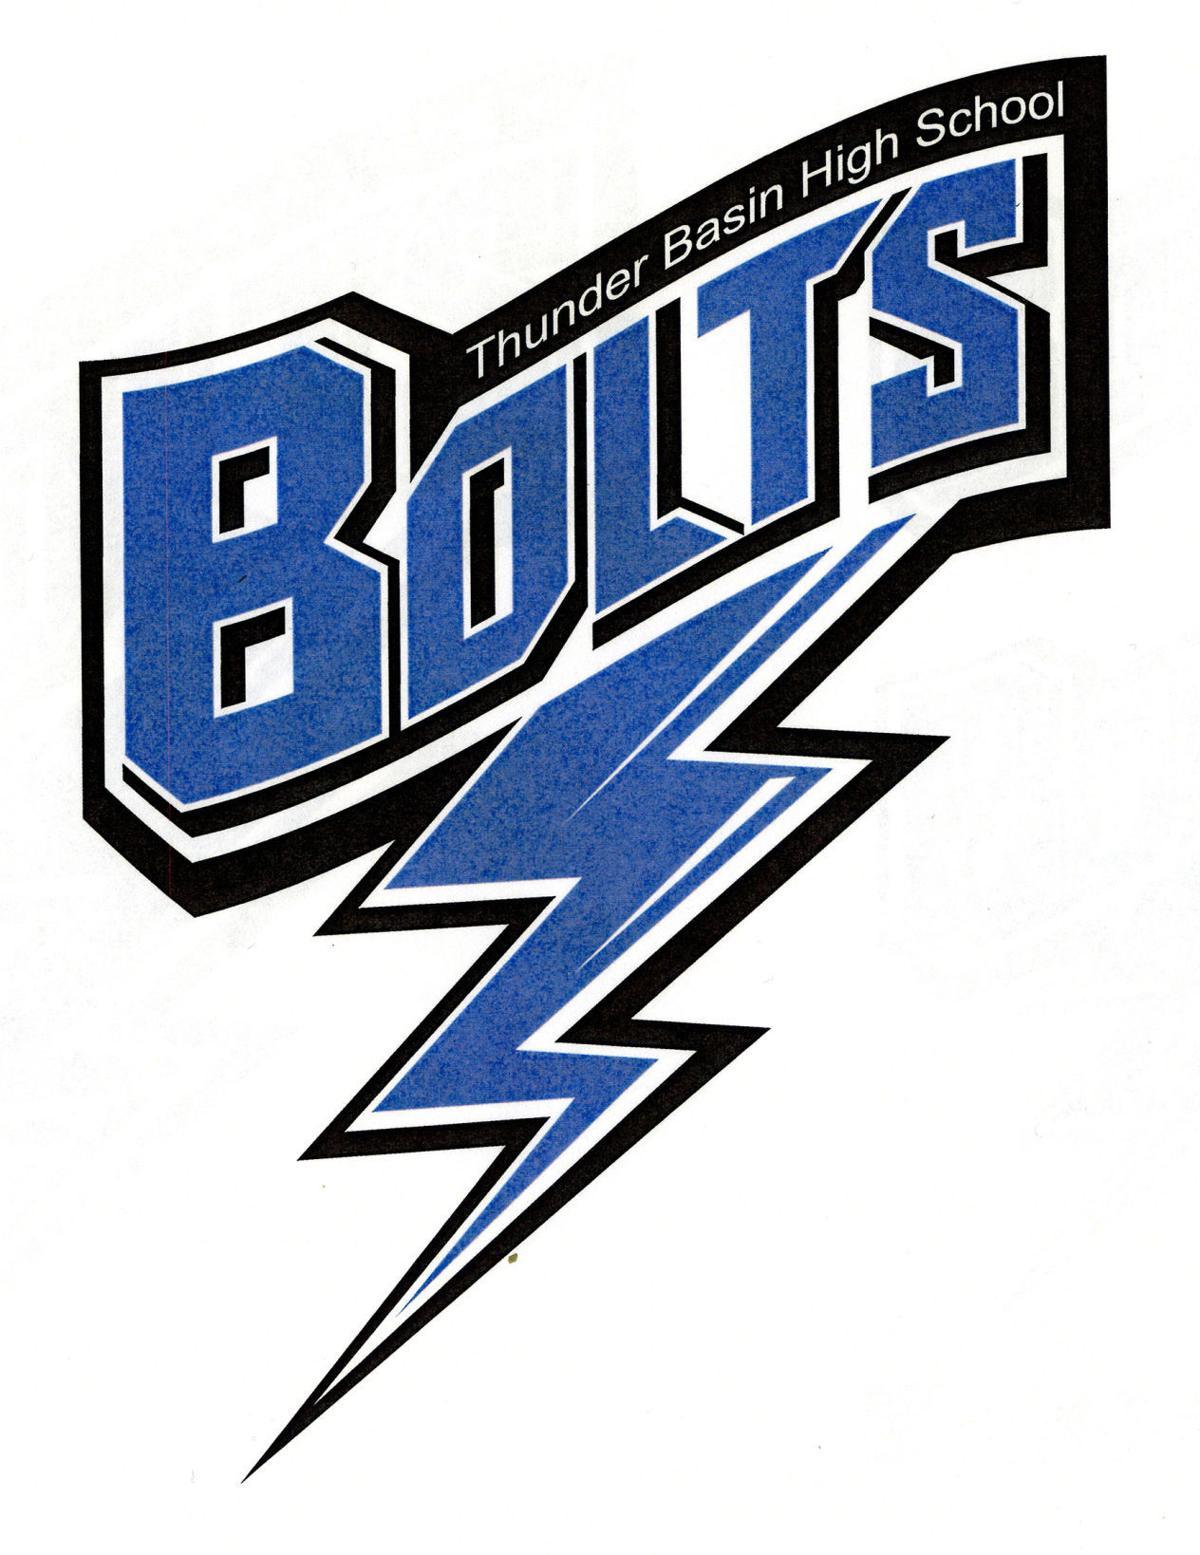 Bolts Logo - Which will become logo for 'Bolts?